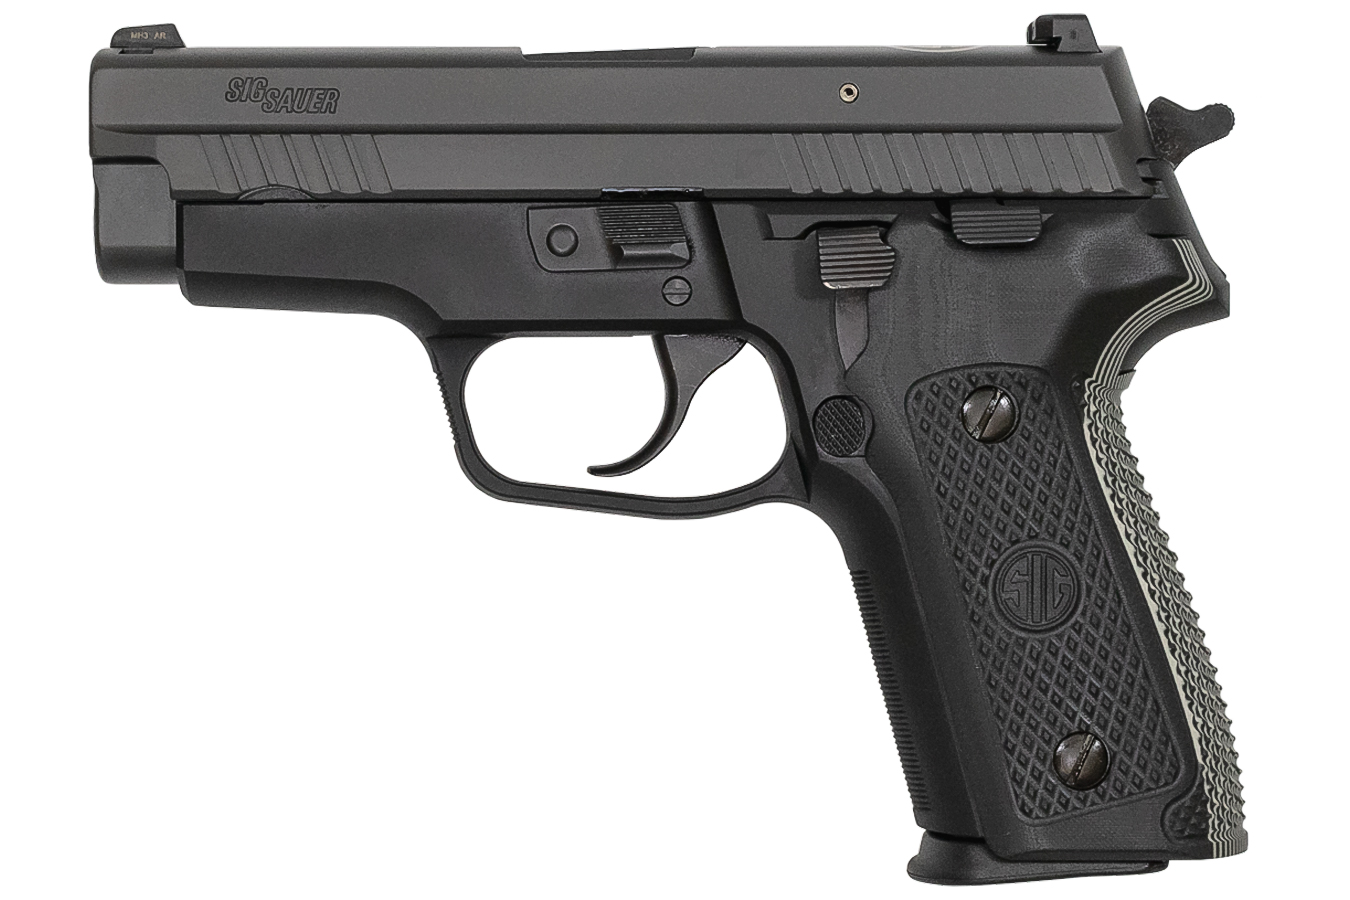 sig-sauer-p229-classic-carry-9mm-da-sa-pistol-with-night-sights